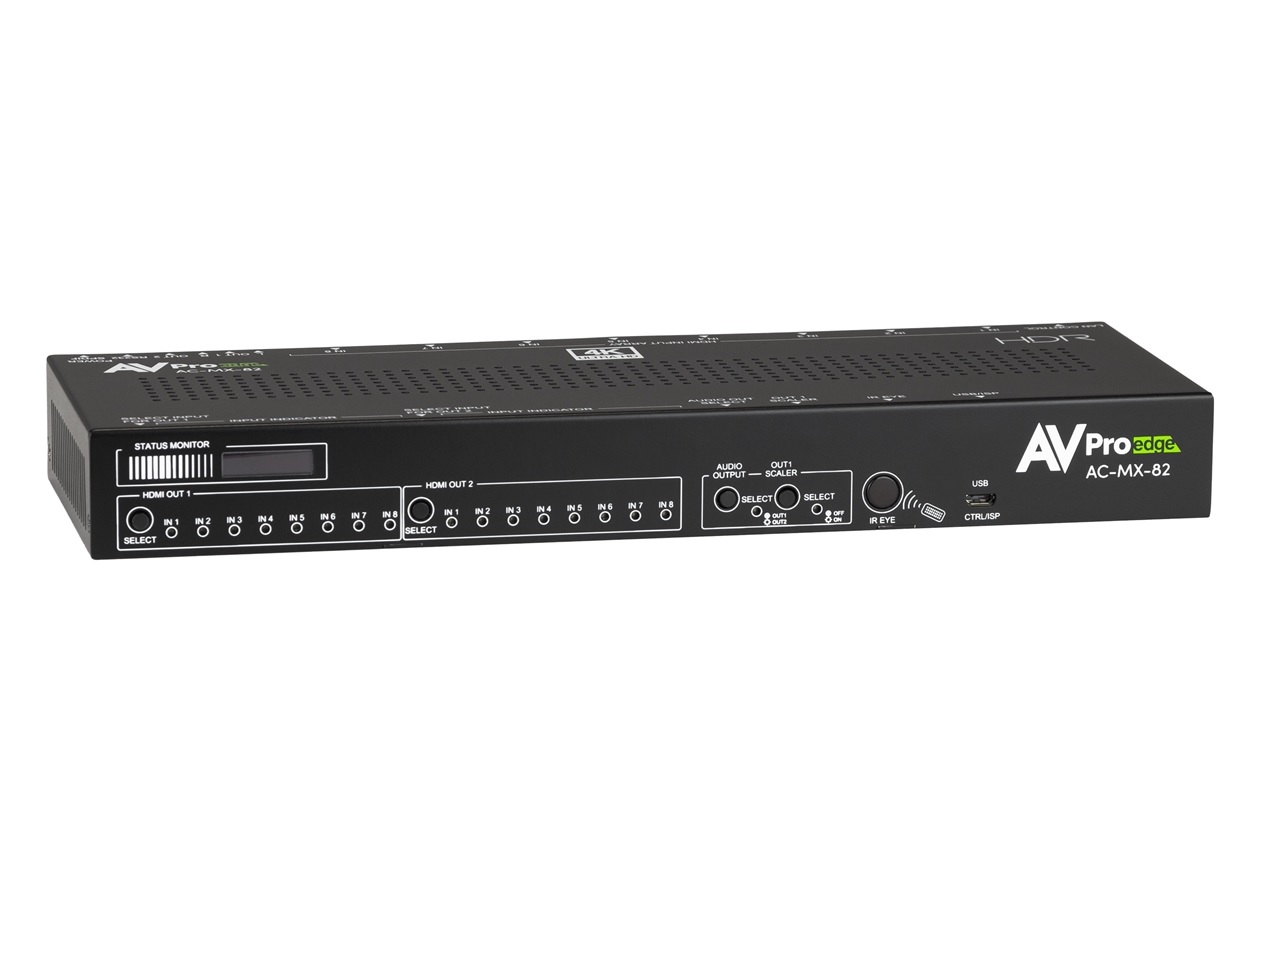 AC-MX-82 18Gbps 4K60 8x2 Matrix Switch with Full HDR Support/Downscaling and Auto Sensing/Switching by AVPro Edge